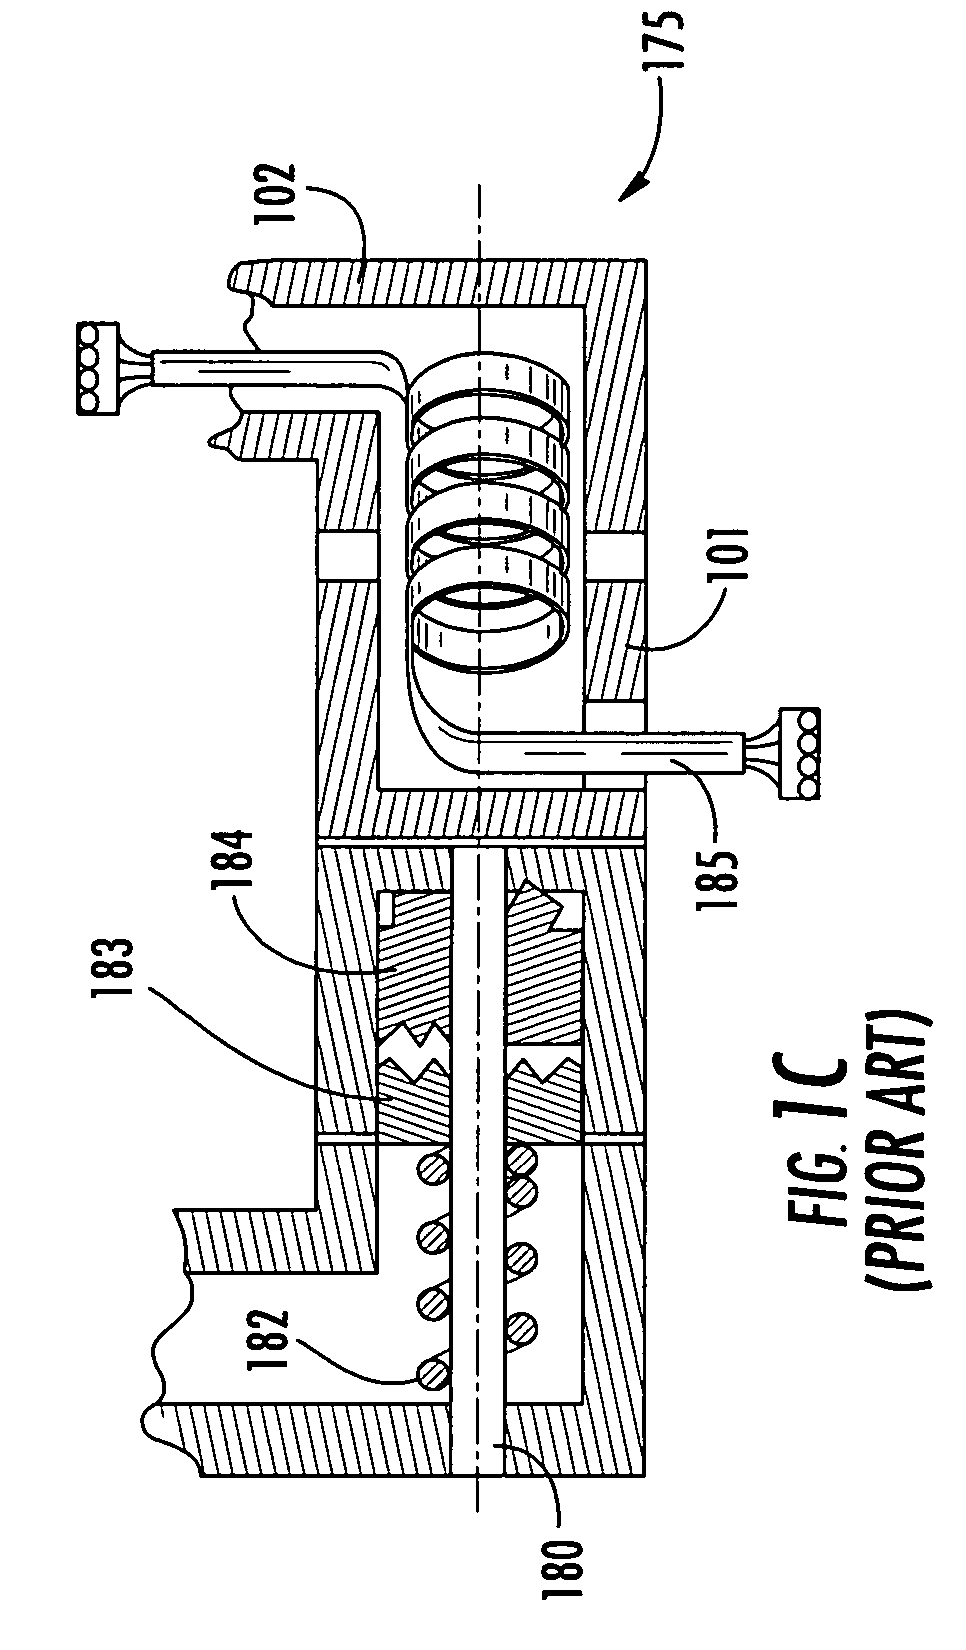 Bi-stable hinge and systems using same